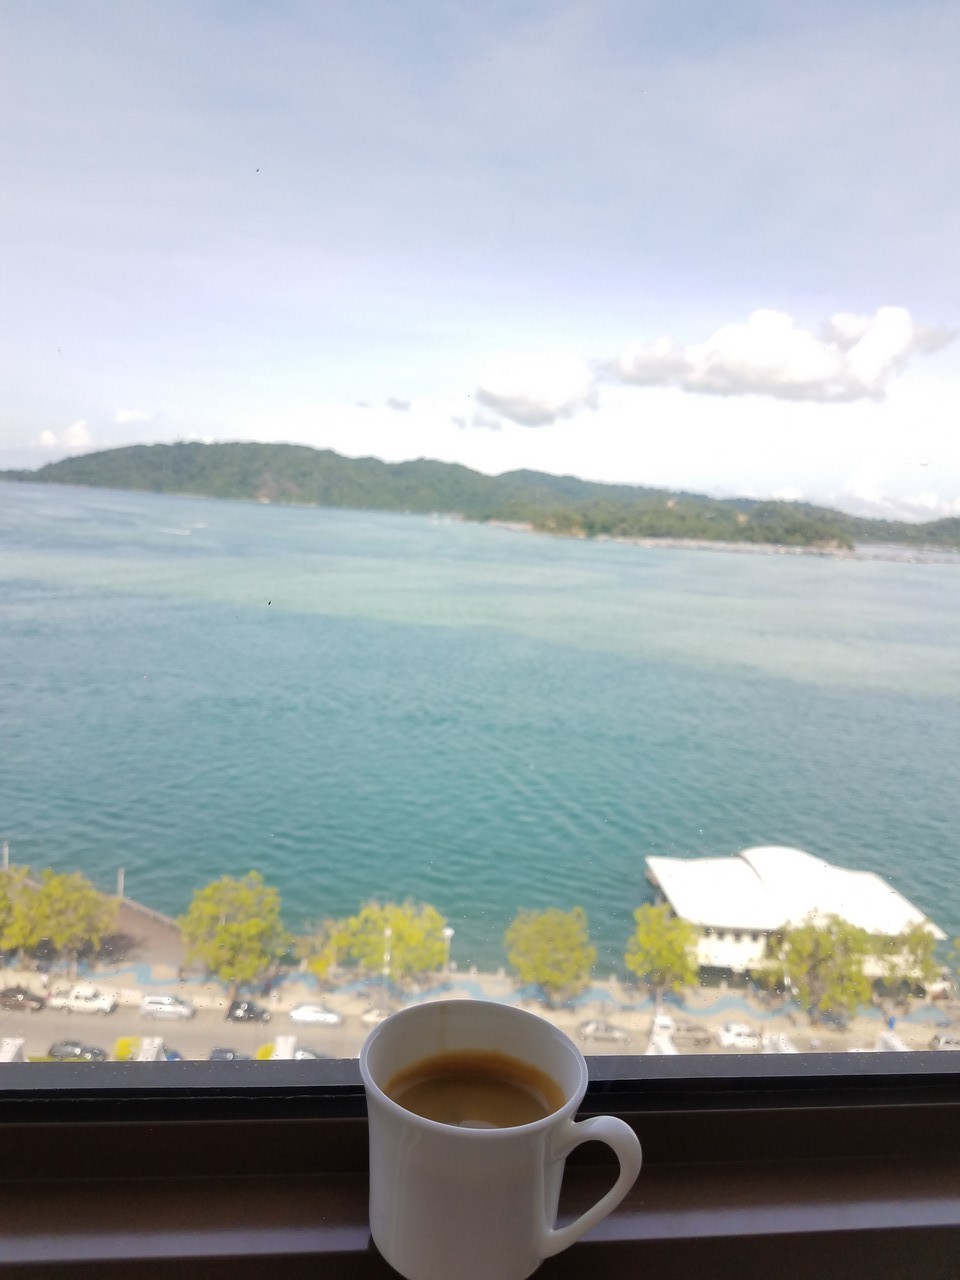 a cup of coffee on a window sill overlooking a body of water